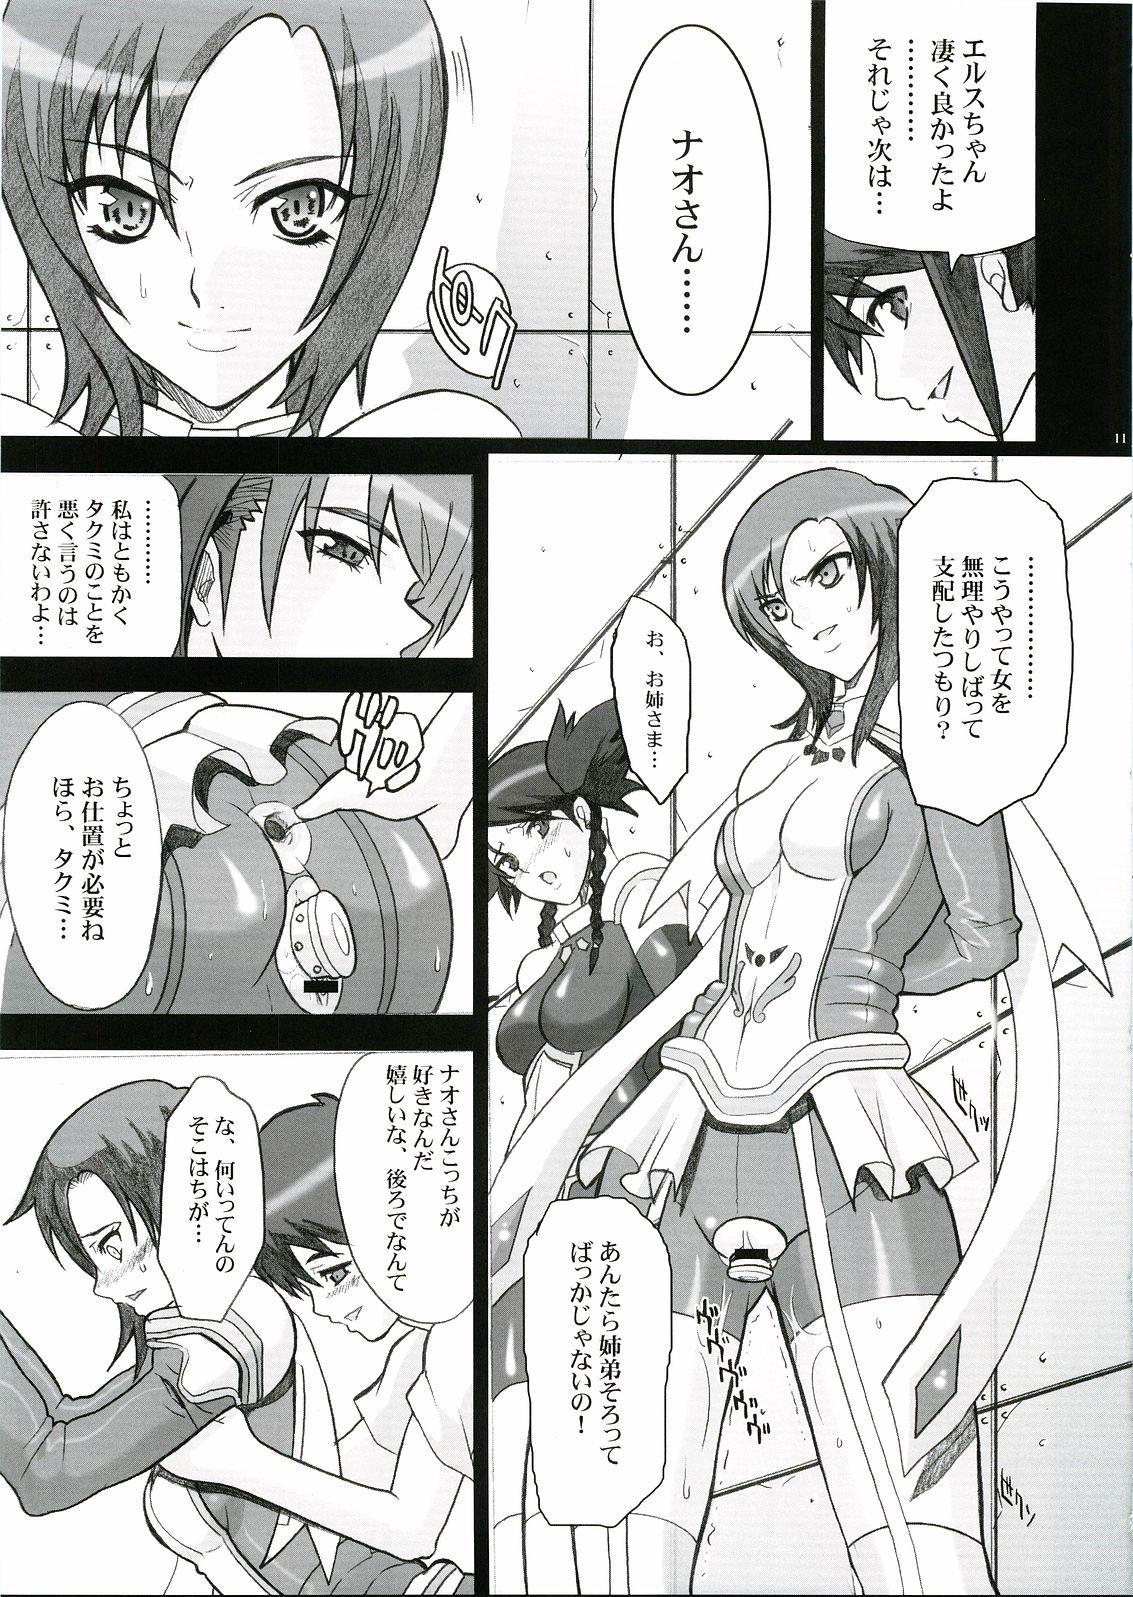 Super Hot Porn IMPERIAL DAYS - Mai-otome People Having Sex - Page 8